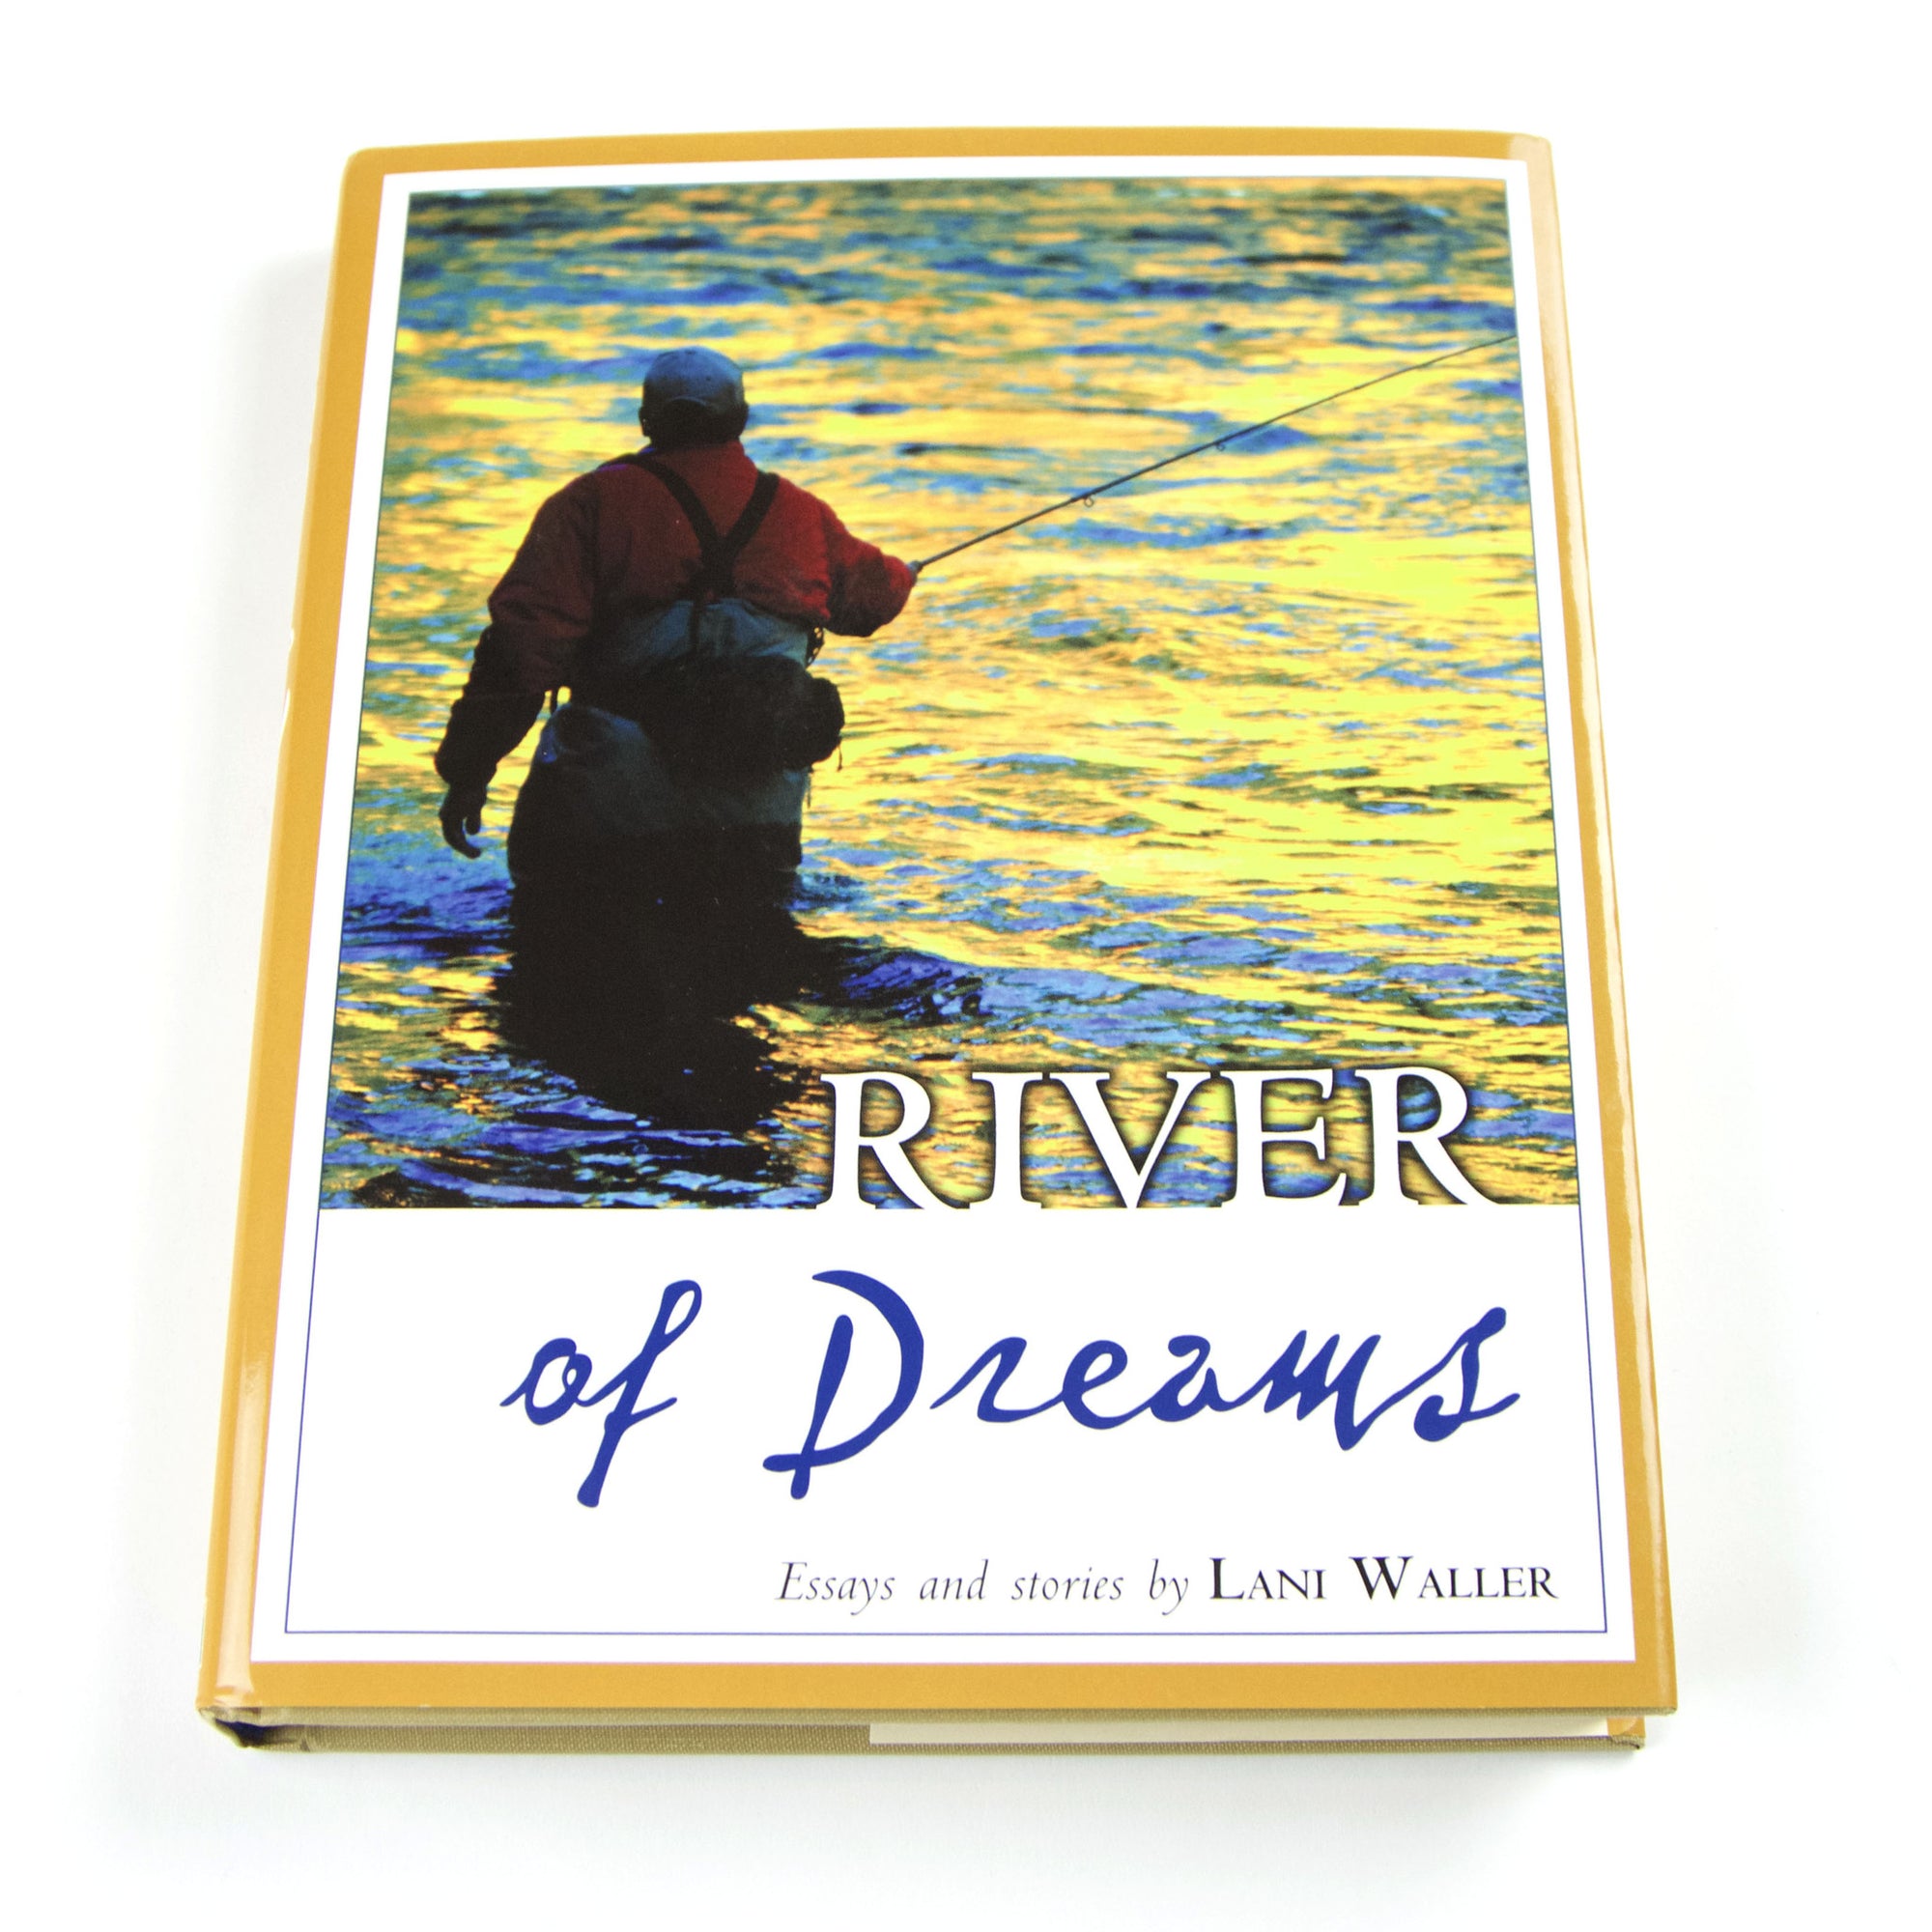 River of Dreams - Essays and Stories by Lani Waller - Down